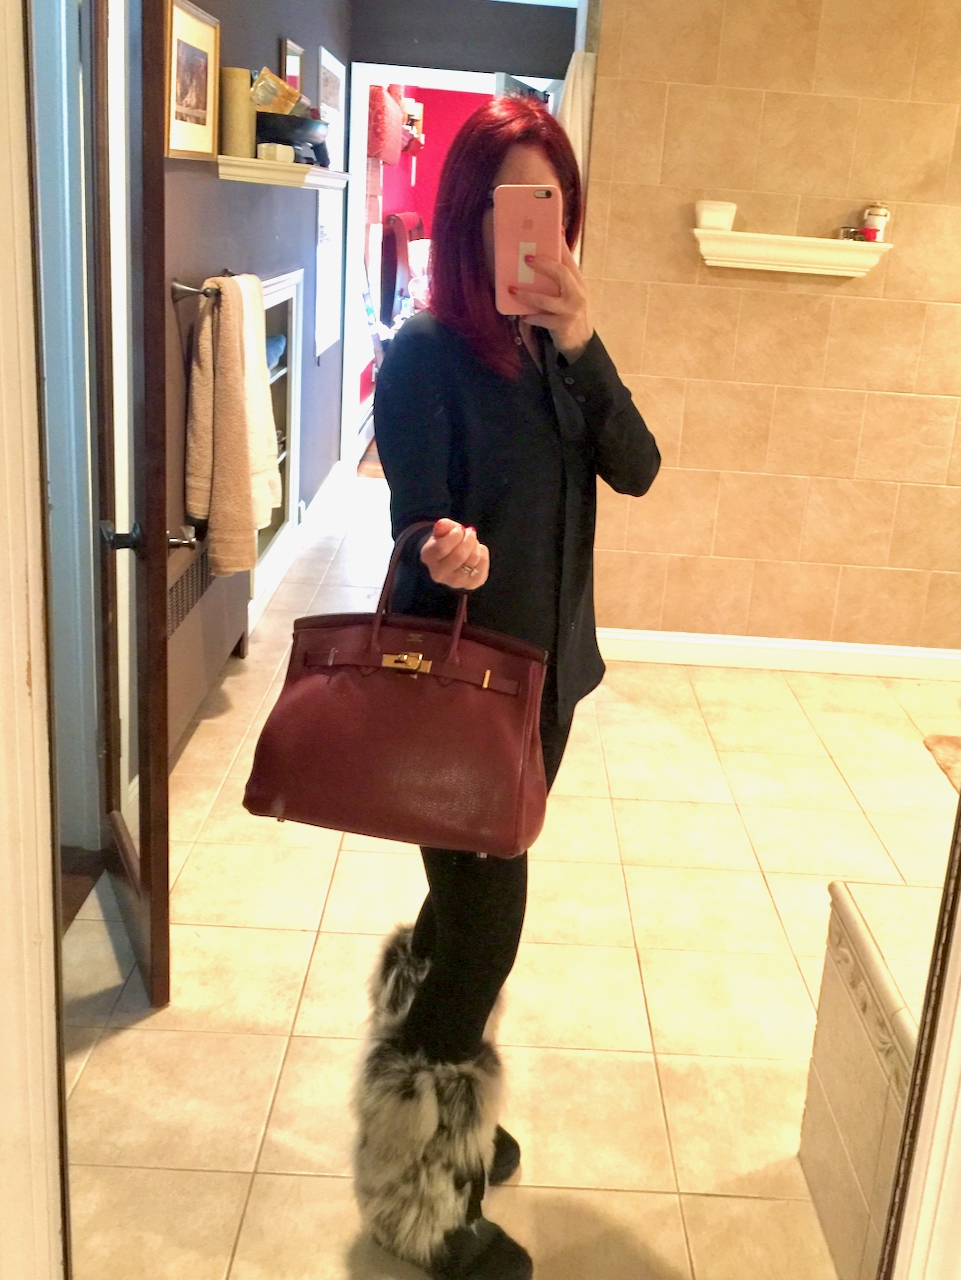 Me circa 2017 with my 35cm Birkin in Rouge H. As you can see, it's a great size for carrying lots of things. I am amused because as I type this, I am wearing the very same leggings and boots. Some things never change! However, I have painted all my walls gray since I took this photo.